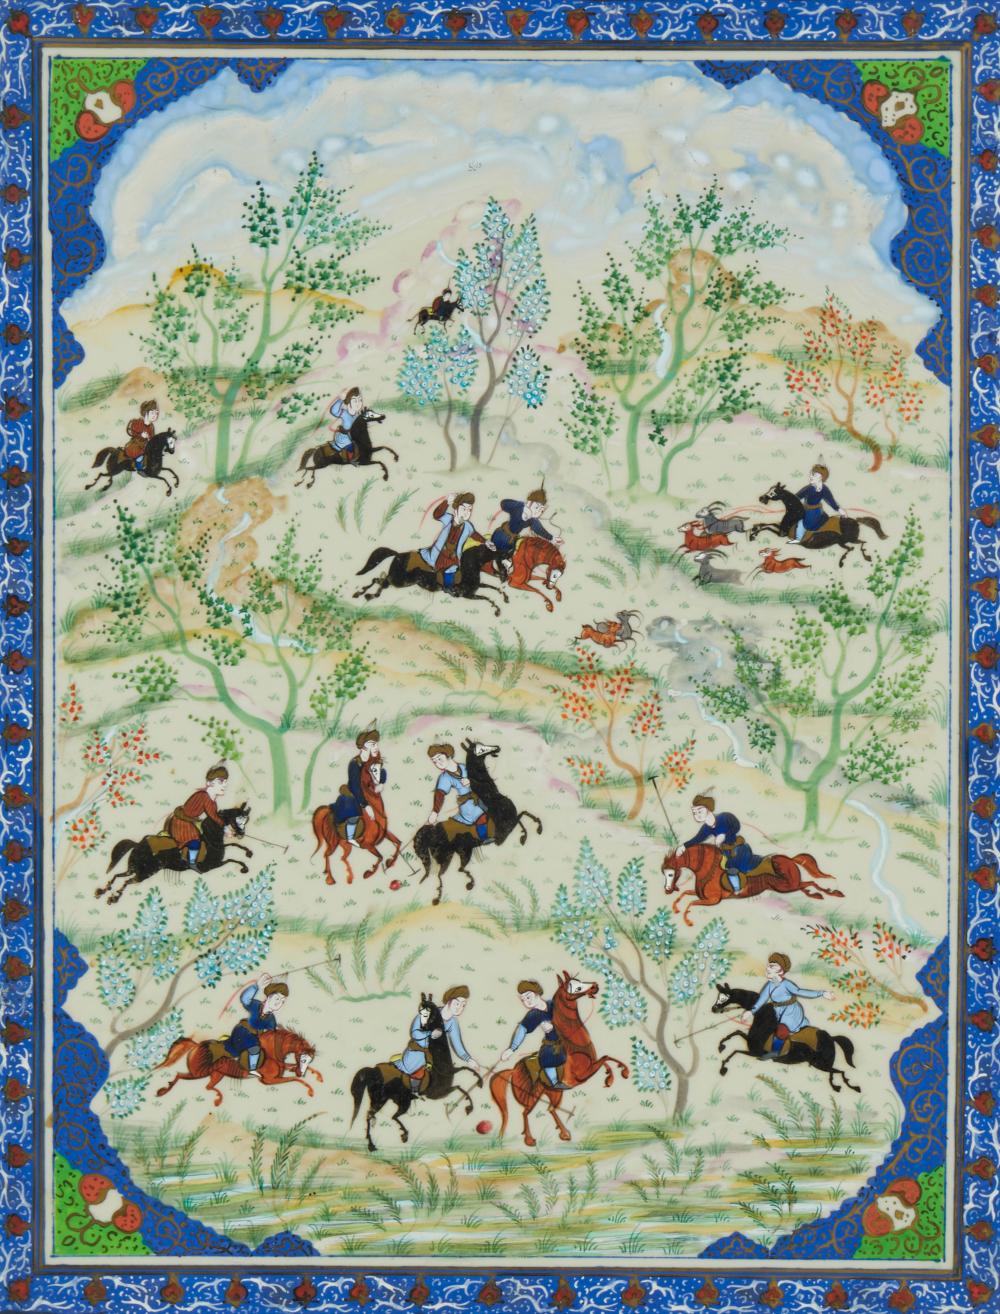 A PERSIAN PAINTING ON IVORINEA